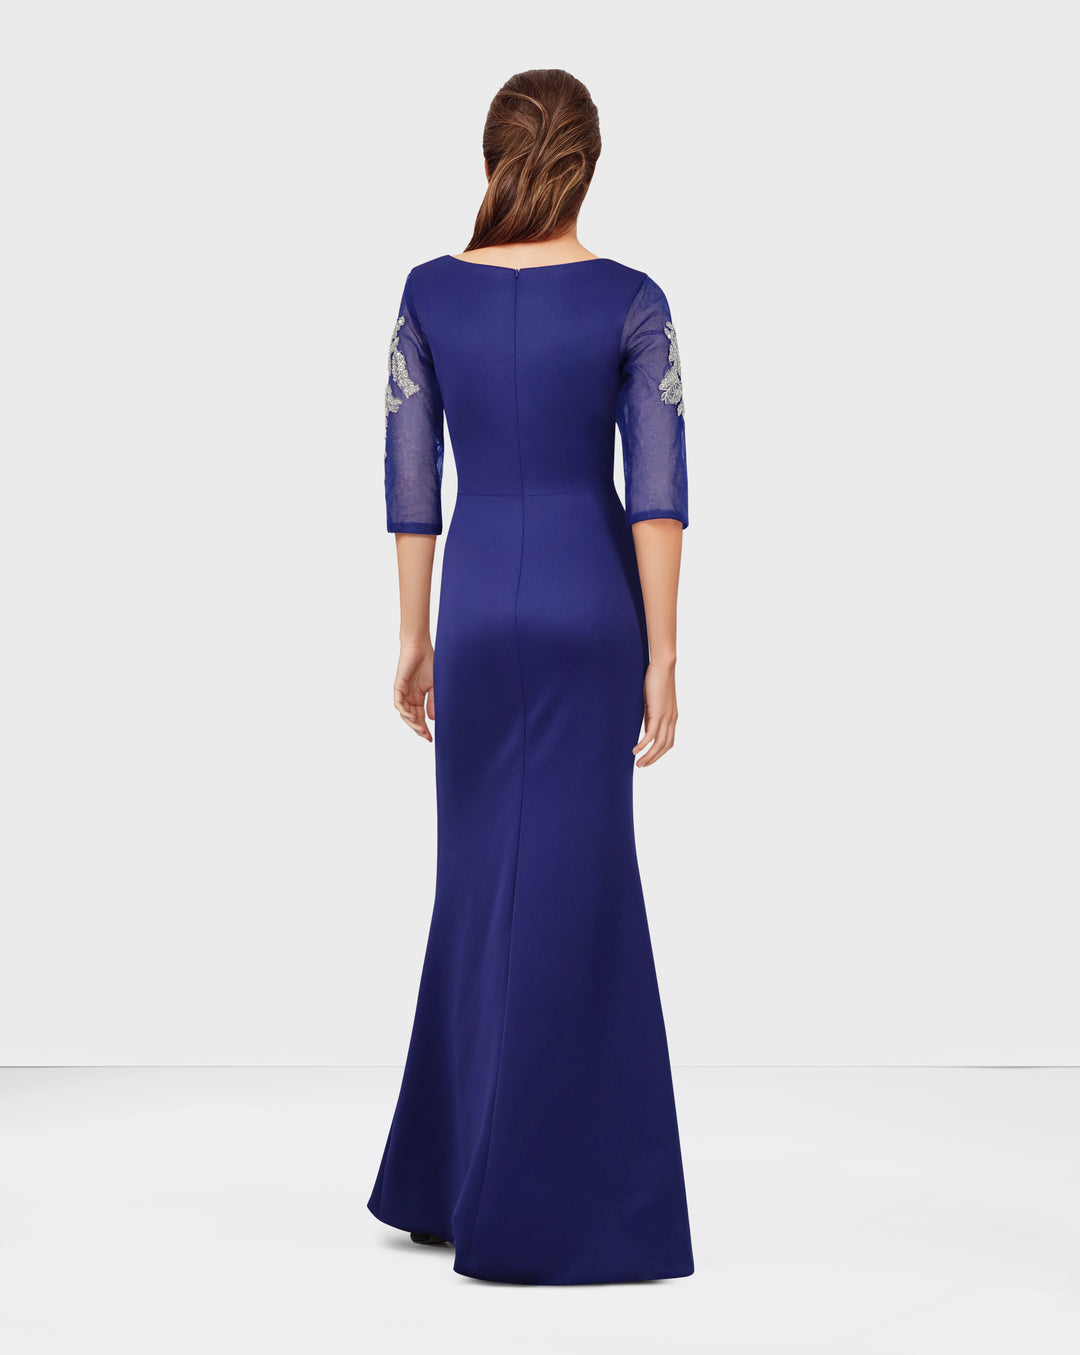 Sequined floor-length blue dress with see-through sleeves